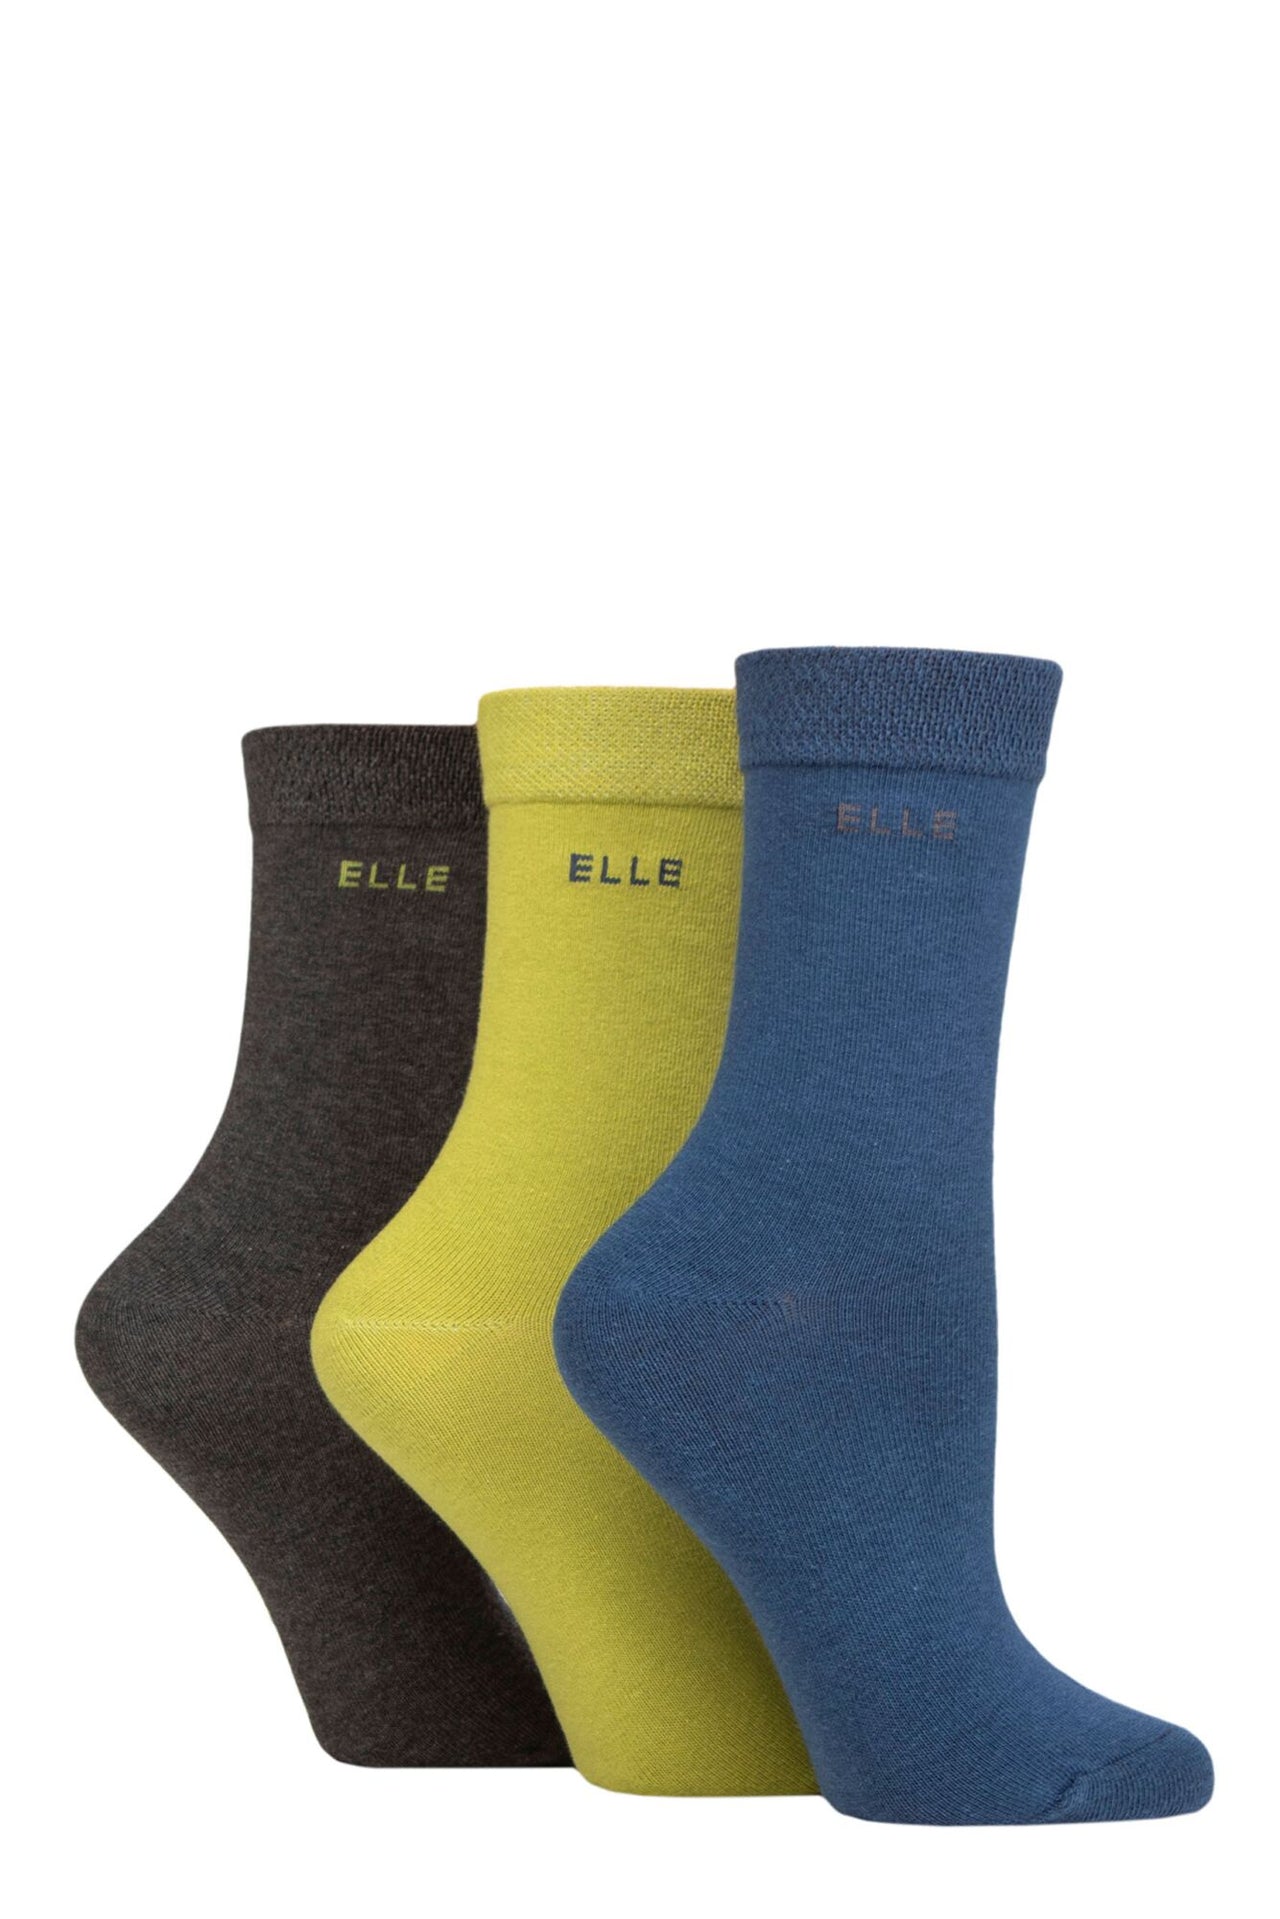 Elle 3 Pairs of Combed Cotton Moonlight Blue Socks